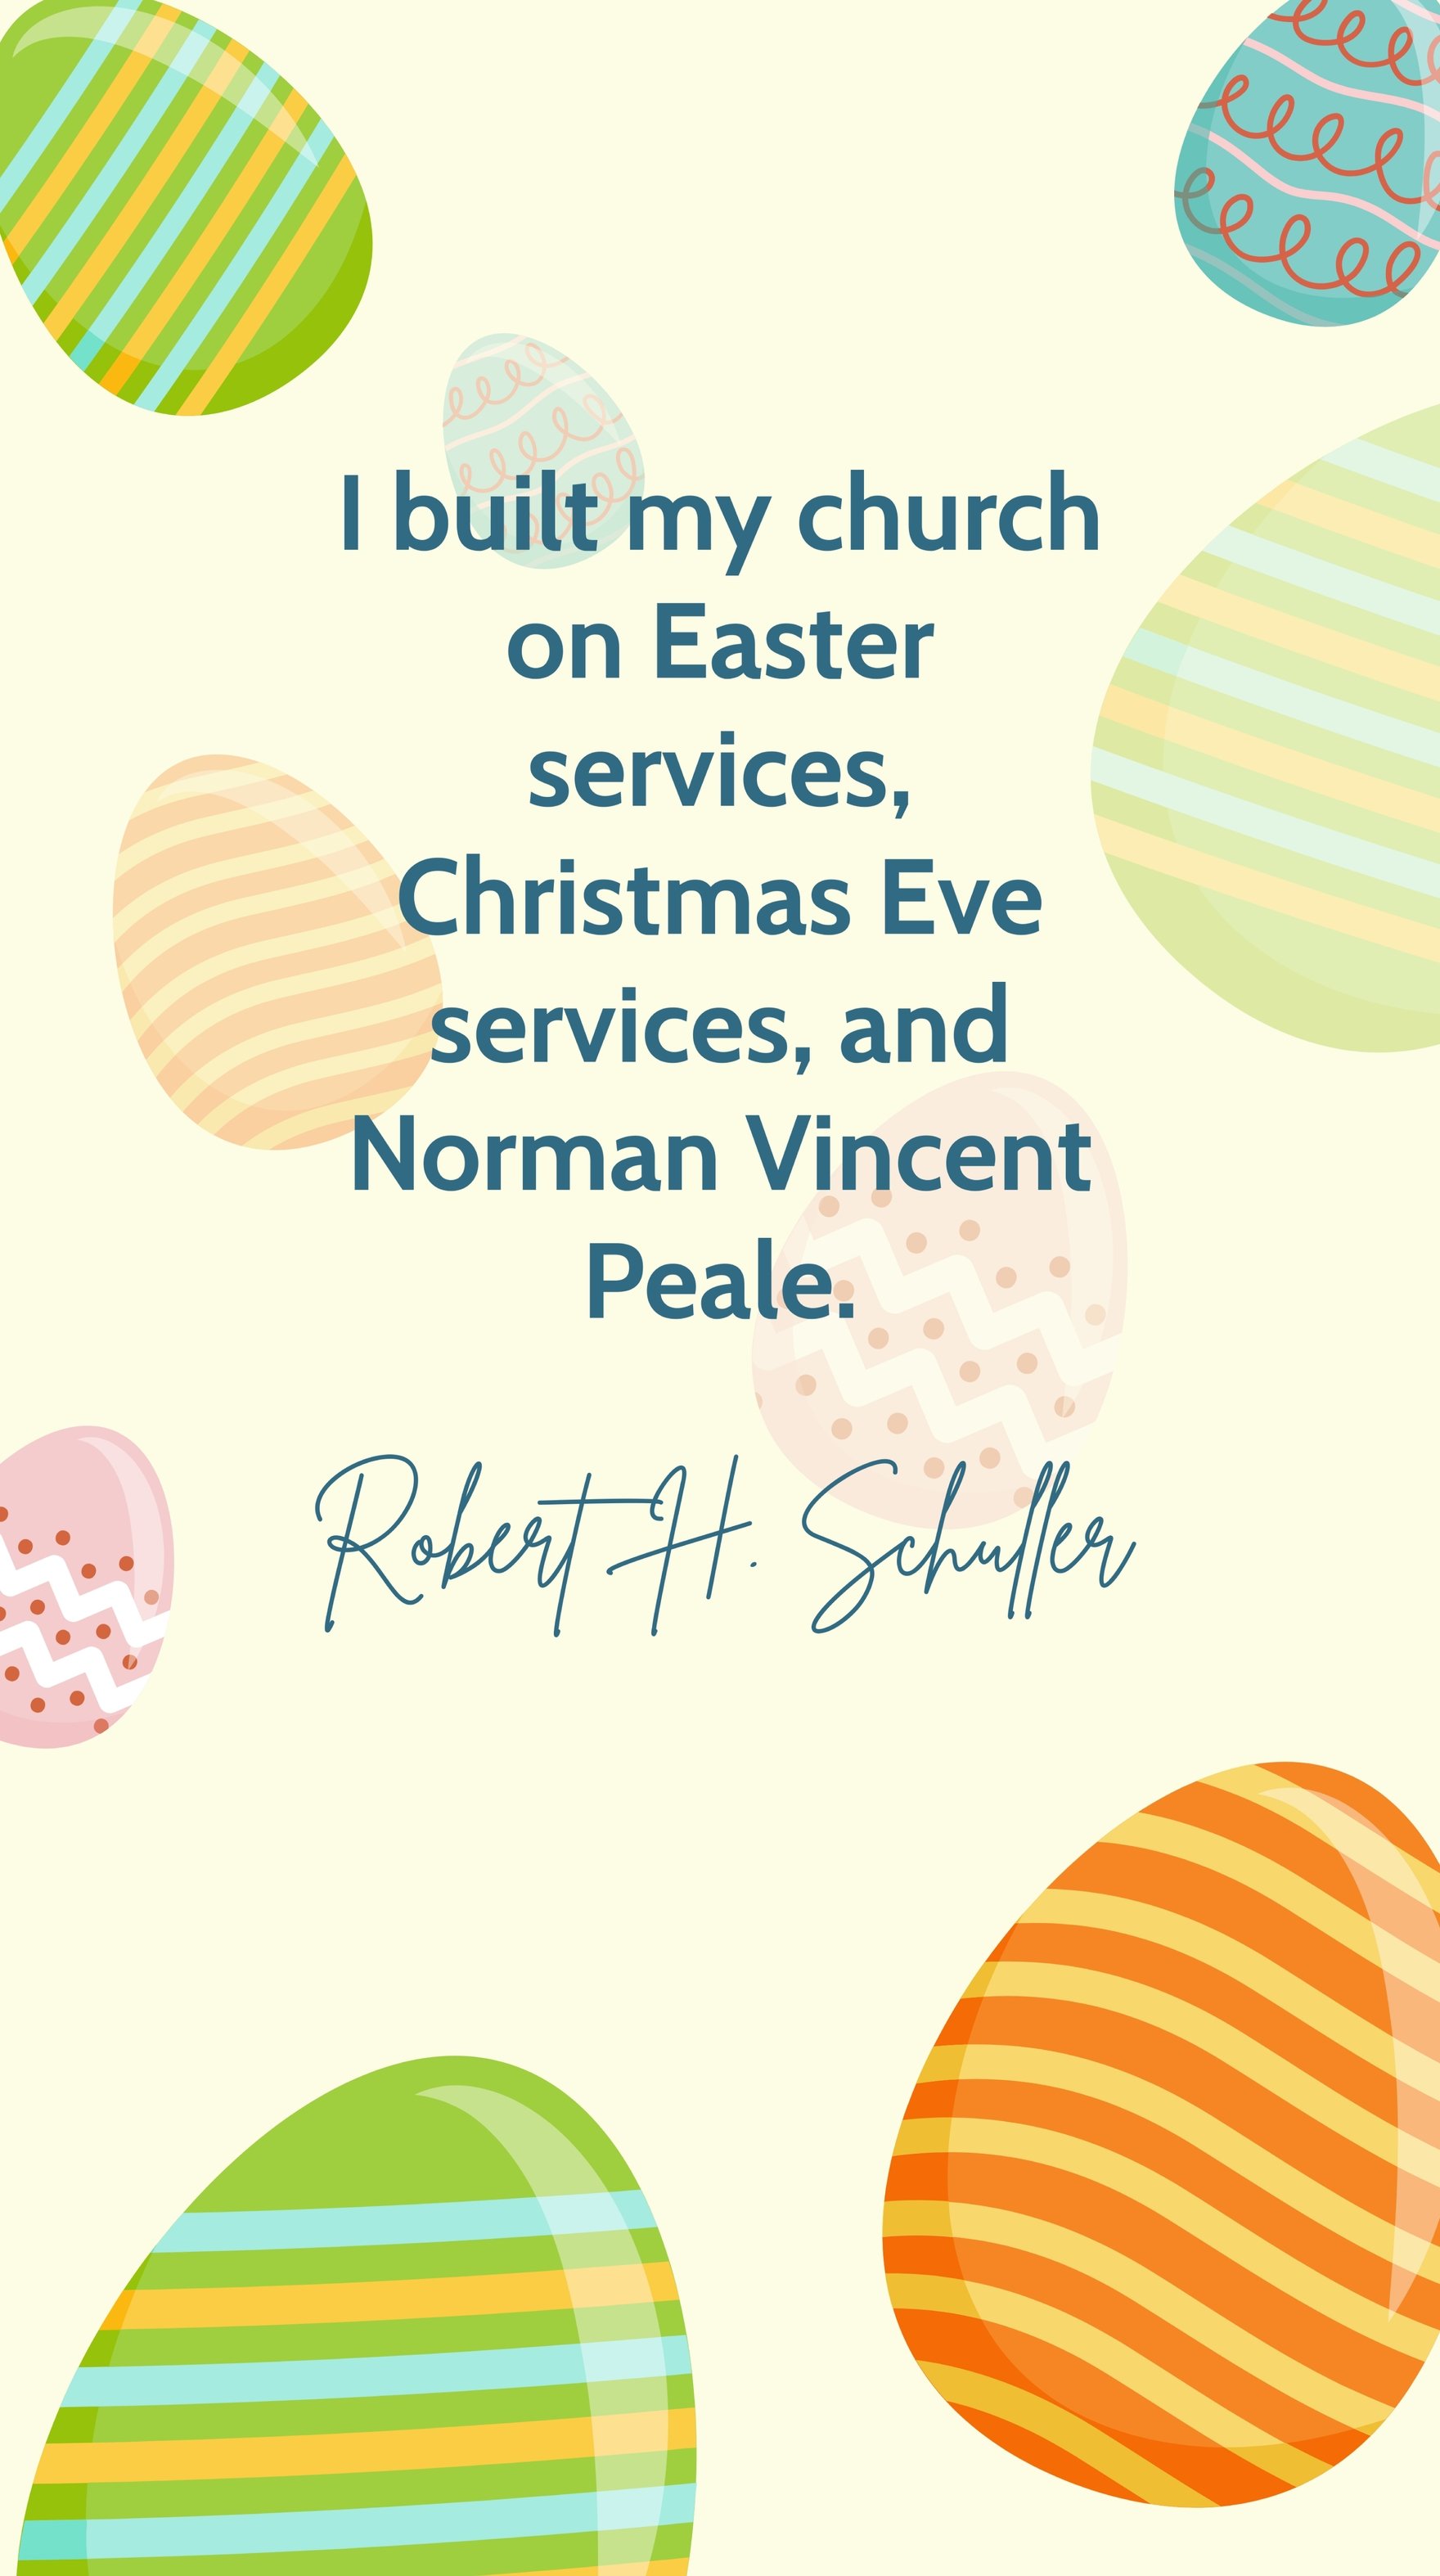 Free Robert H. Schuller - I built my church on Easter services, Christmas Eve services, and Norman Vincent Peale. in JPG